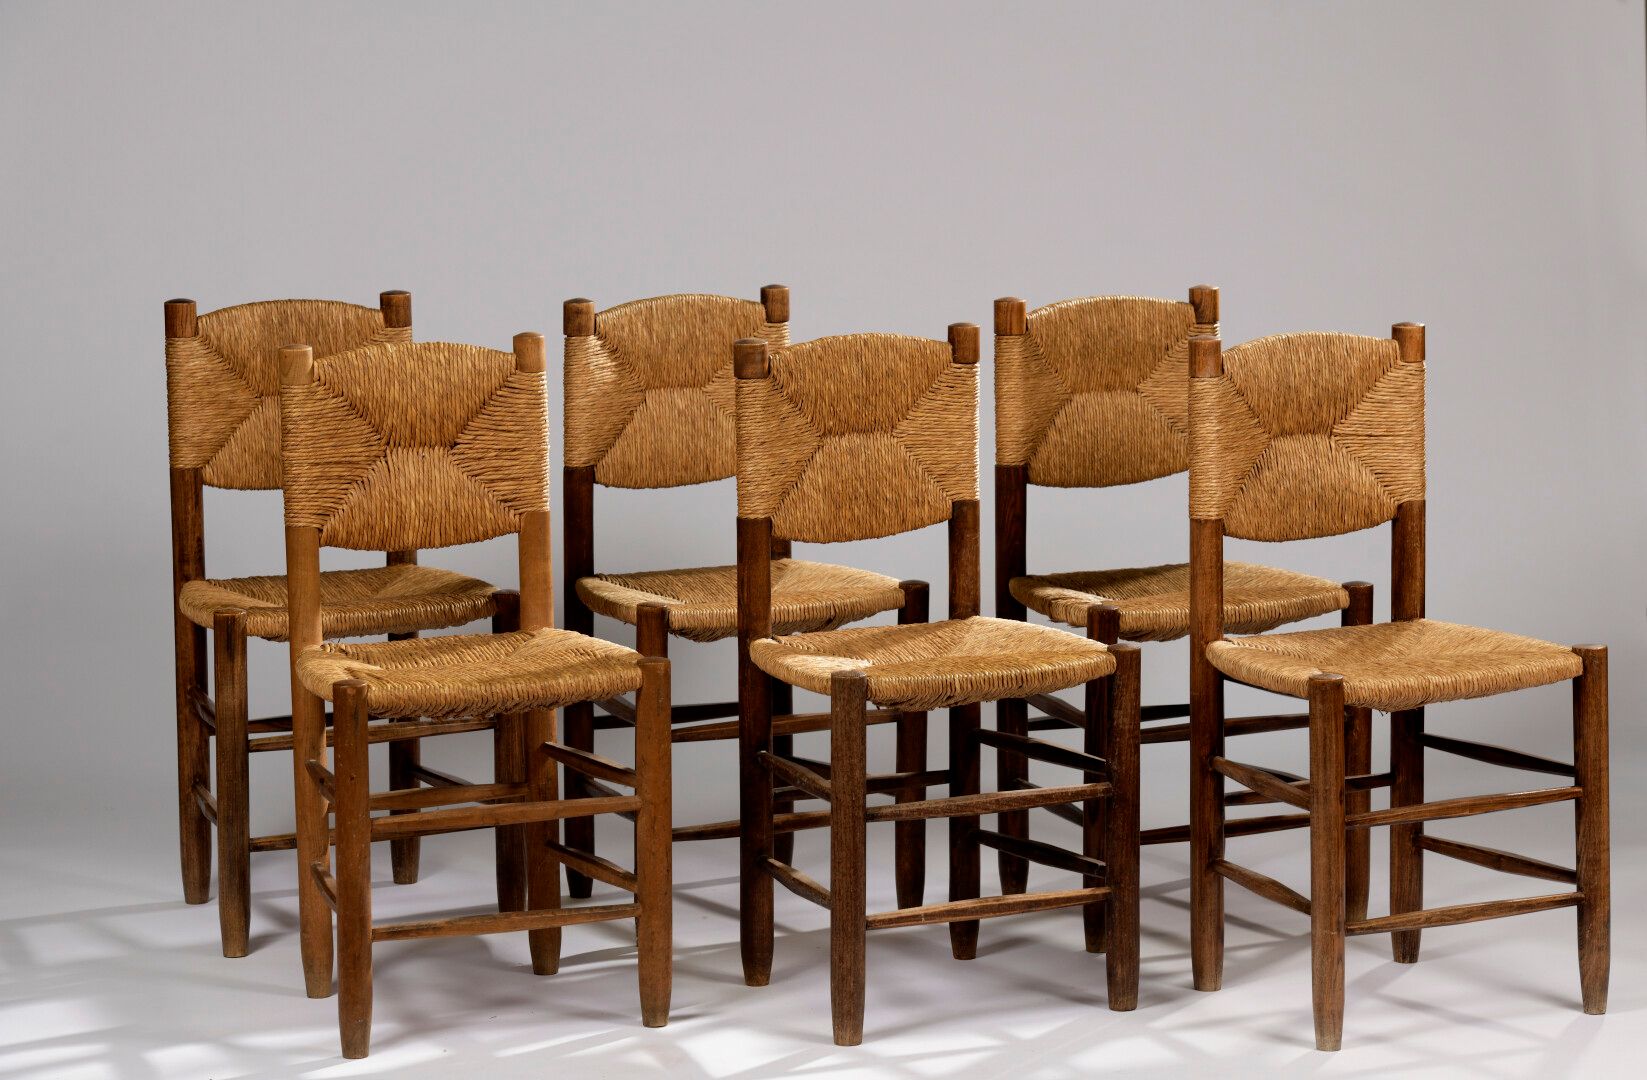 Null Charlotte PERRIAND (1903-1999)

Suite of six chairs called "Bauche" with st&hellip;